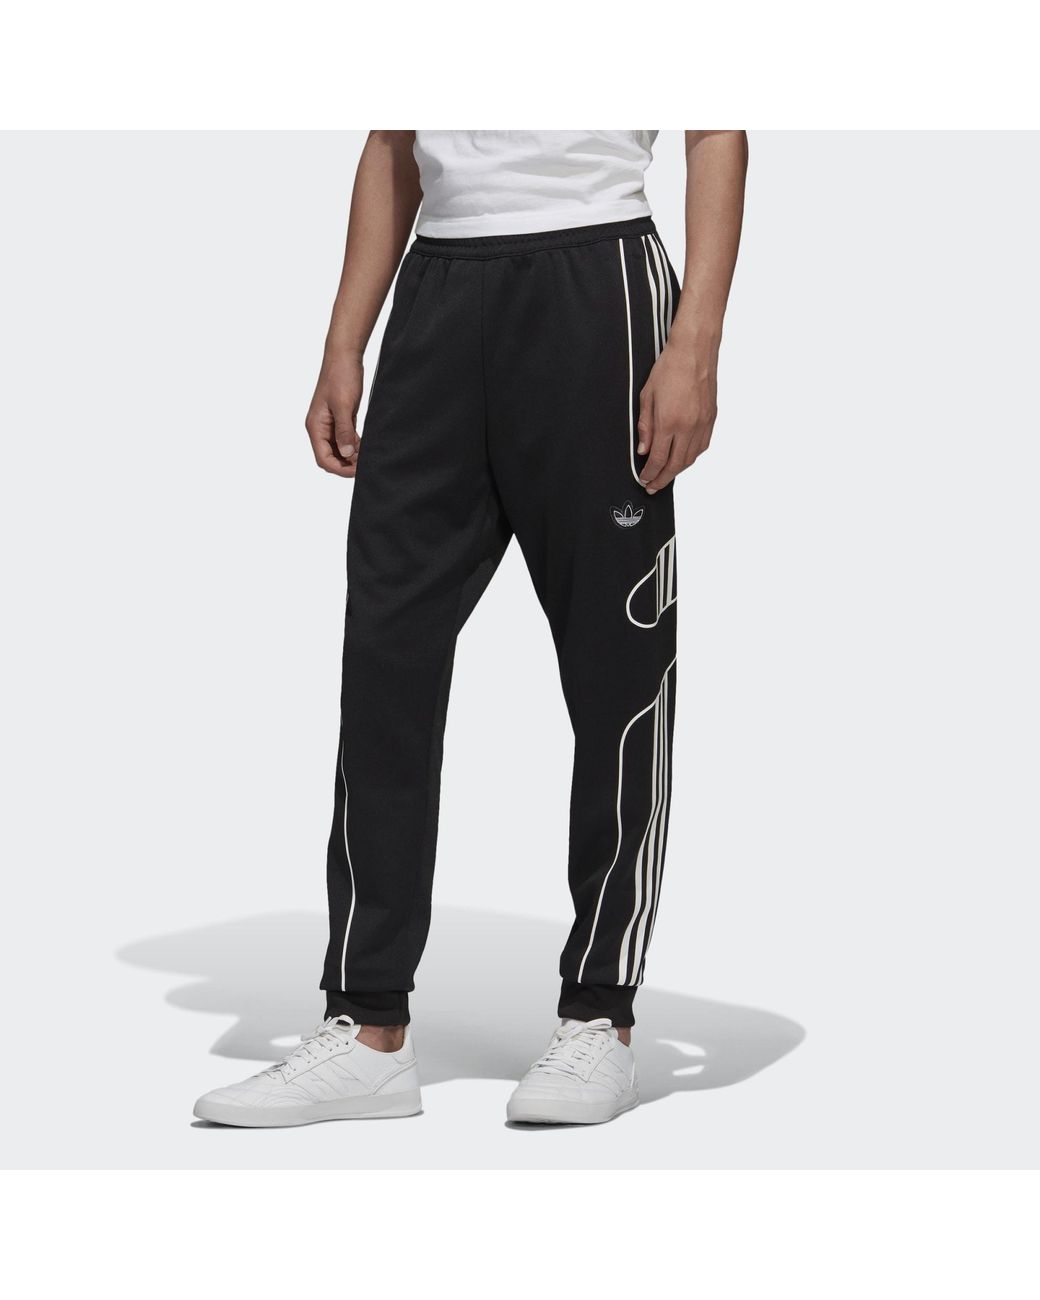 Adidas Mens Originals Flamestrike Track Pants  Get Best Price from  Manufacturers  Suppliers in India